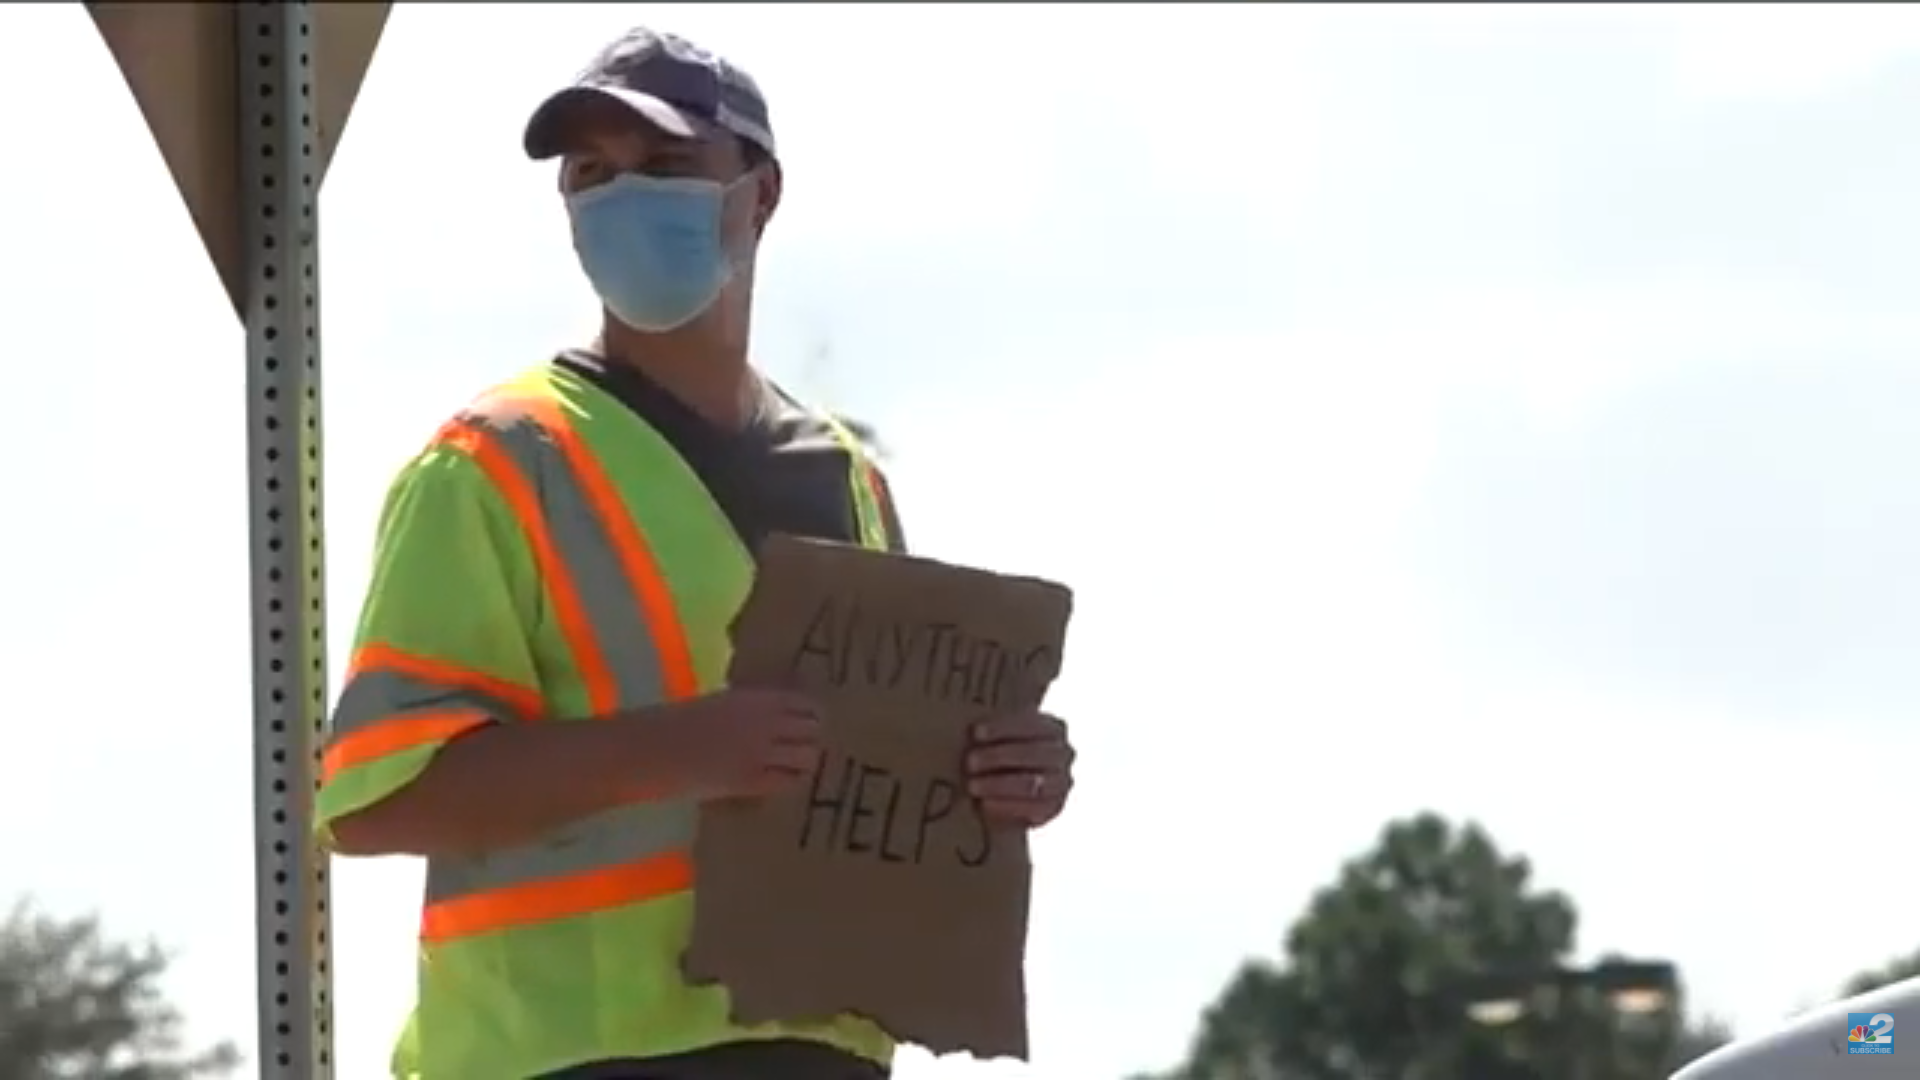 Panhandlers Who are they and how much do they make? The Suncoast News & Scoop